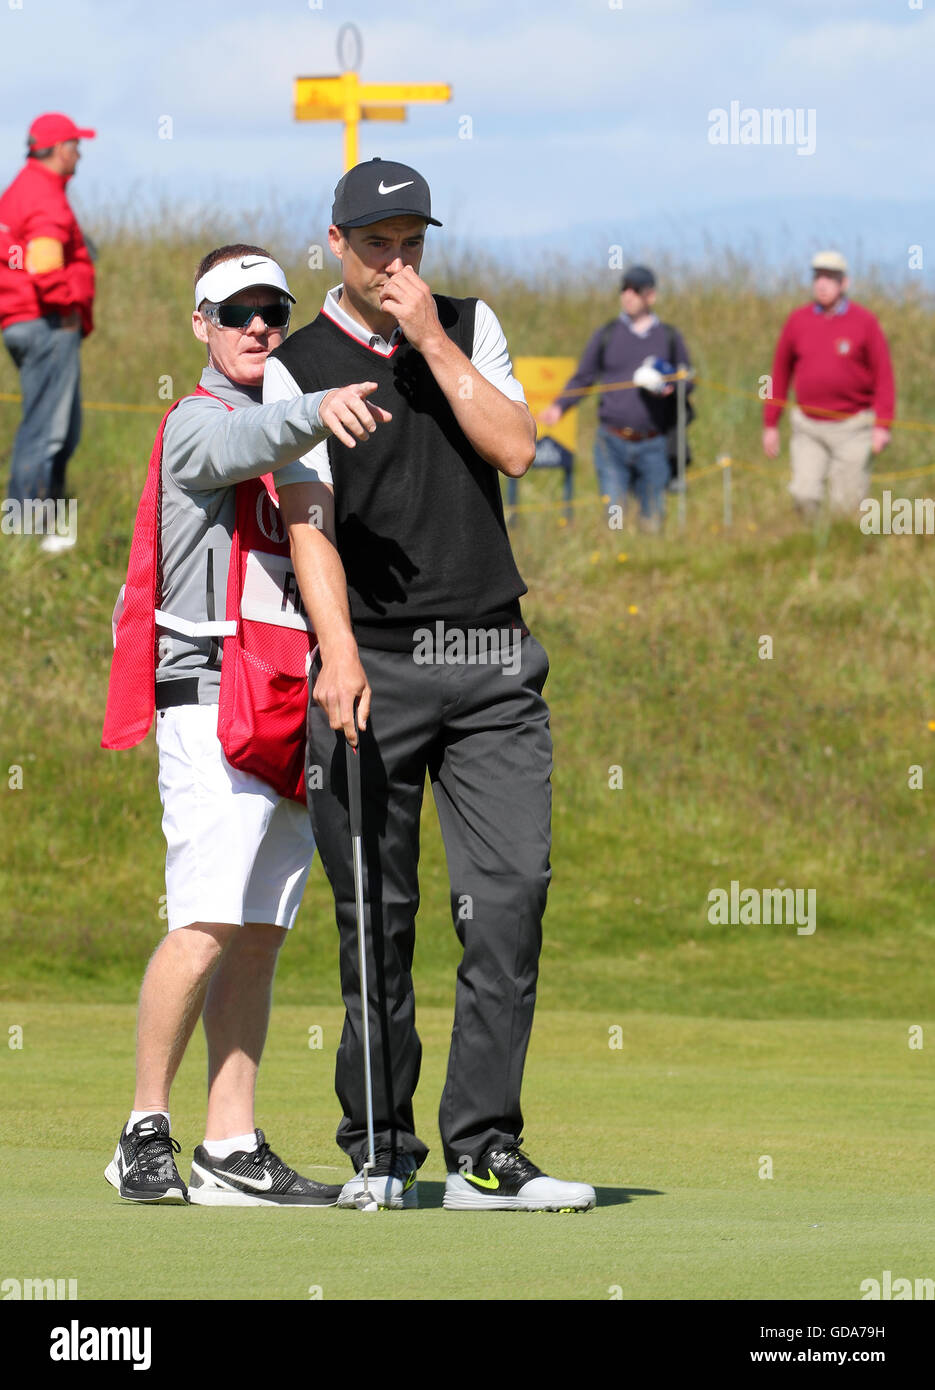 Englands Ross Fisher bei Tag eins von The Open Championship 2016 im Royal Troon Golf Club, South Ayrshire. Stockfoto